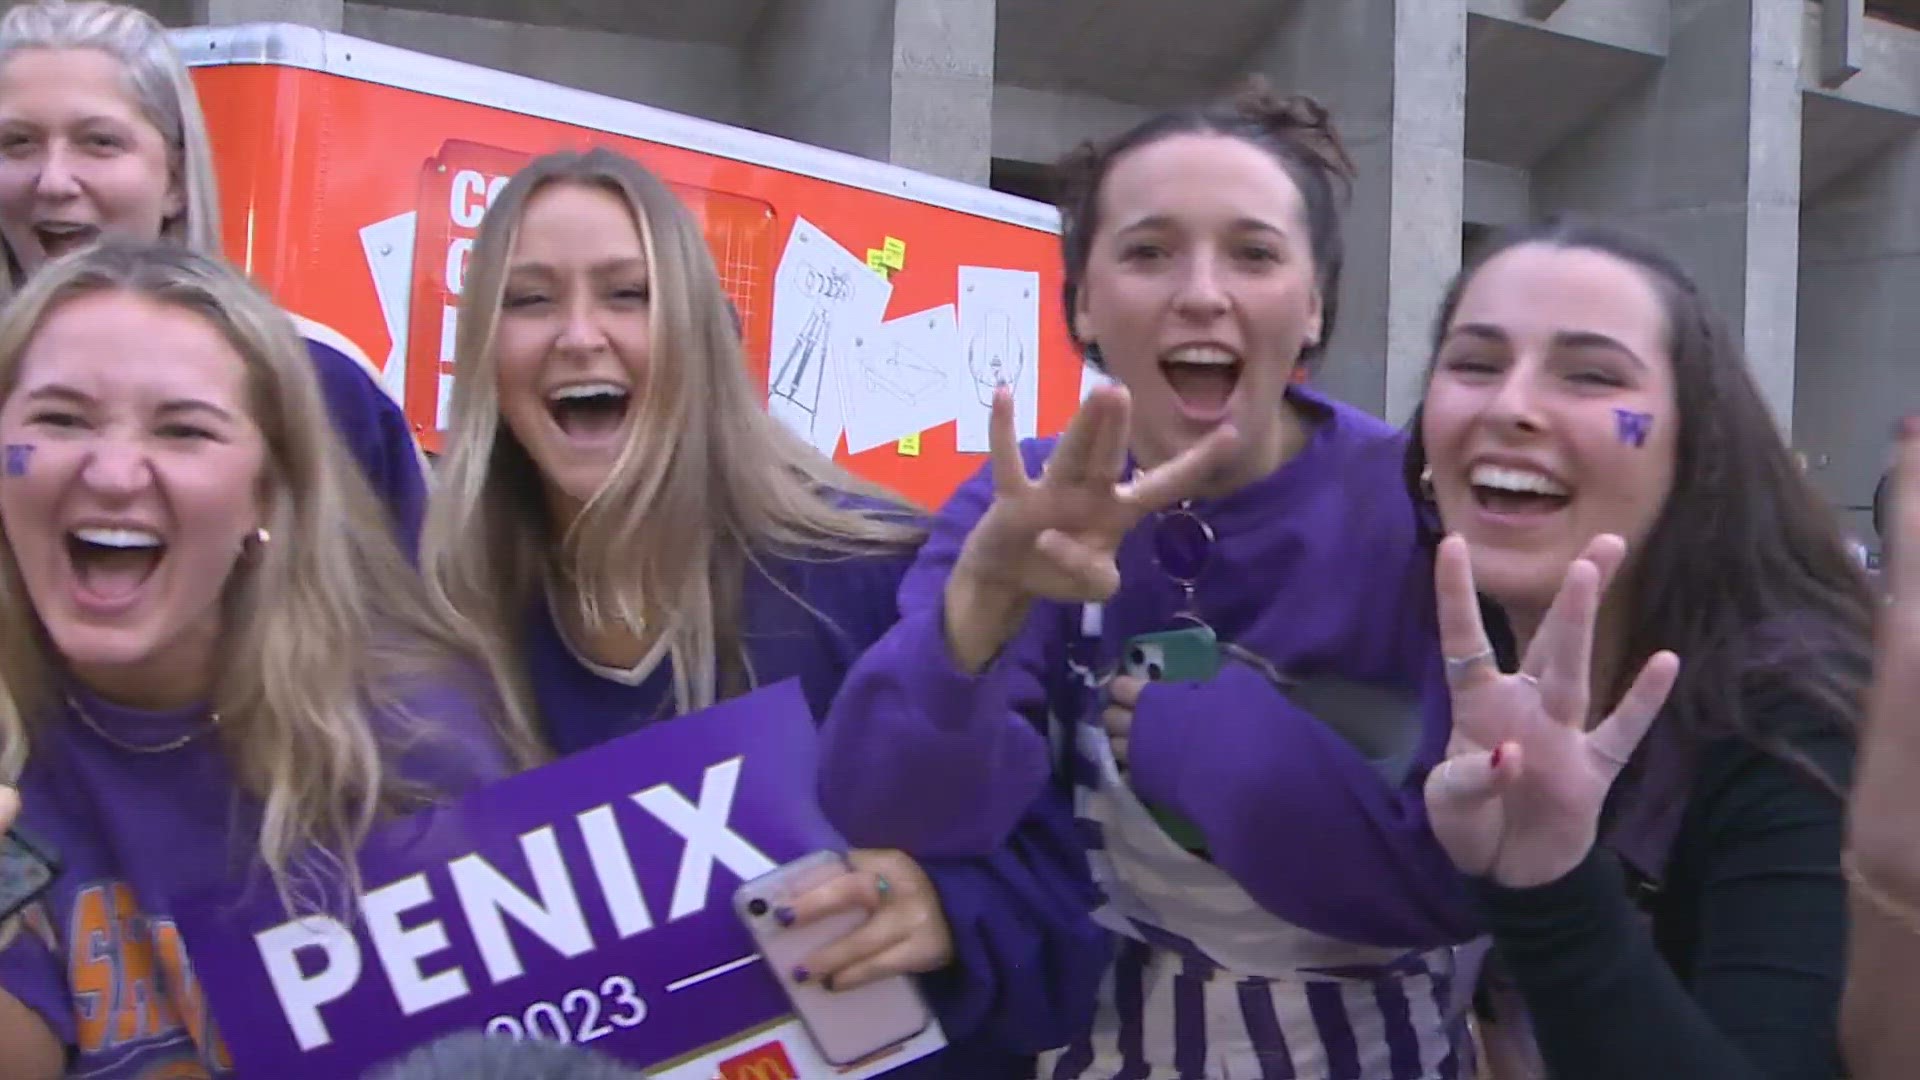 Fans began filling Red Square in Seattle as early as 3 a.m. on Saturday ahead of the UW vs. Oregon game.